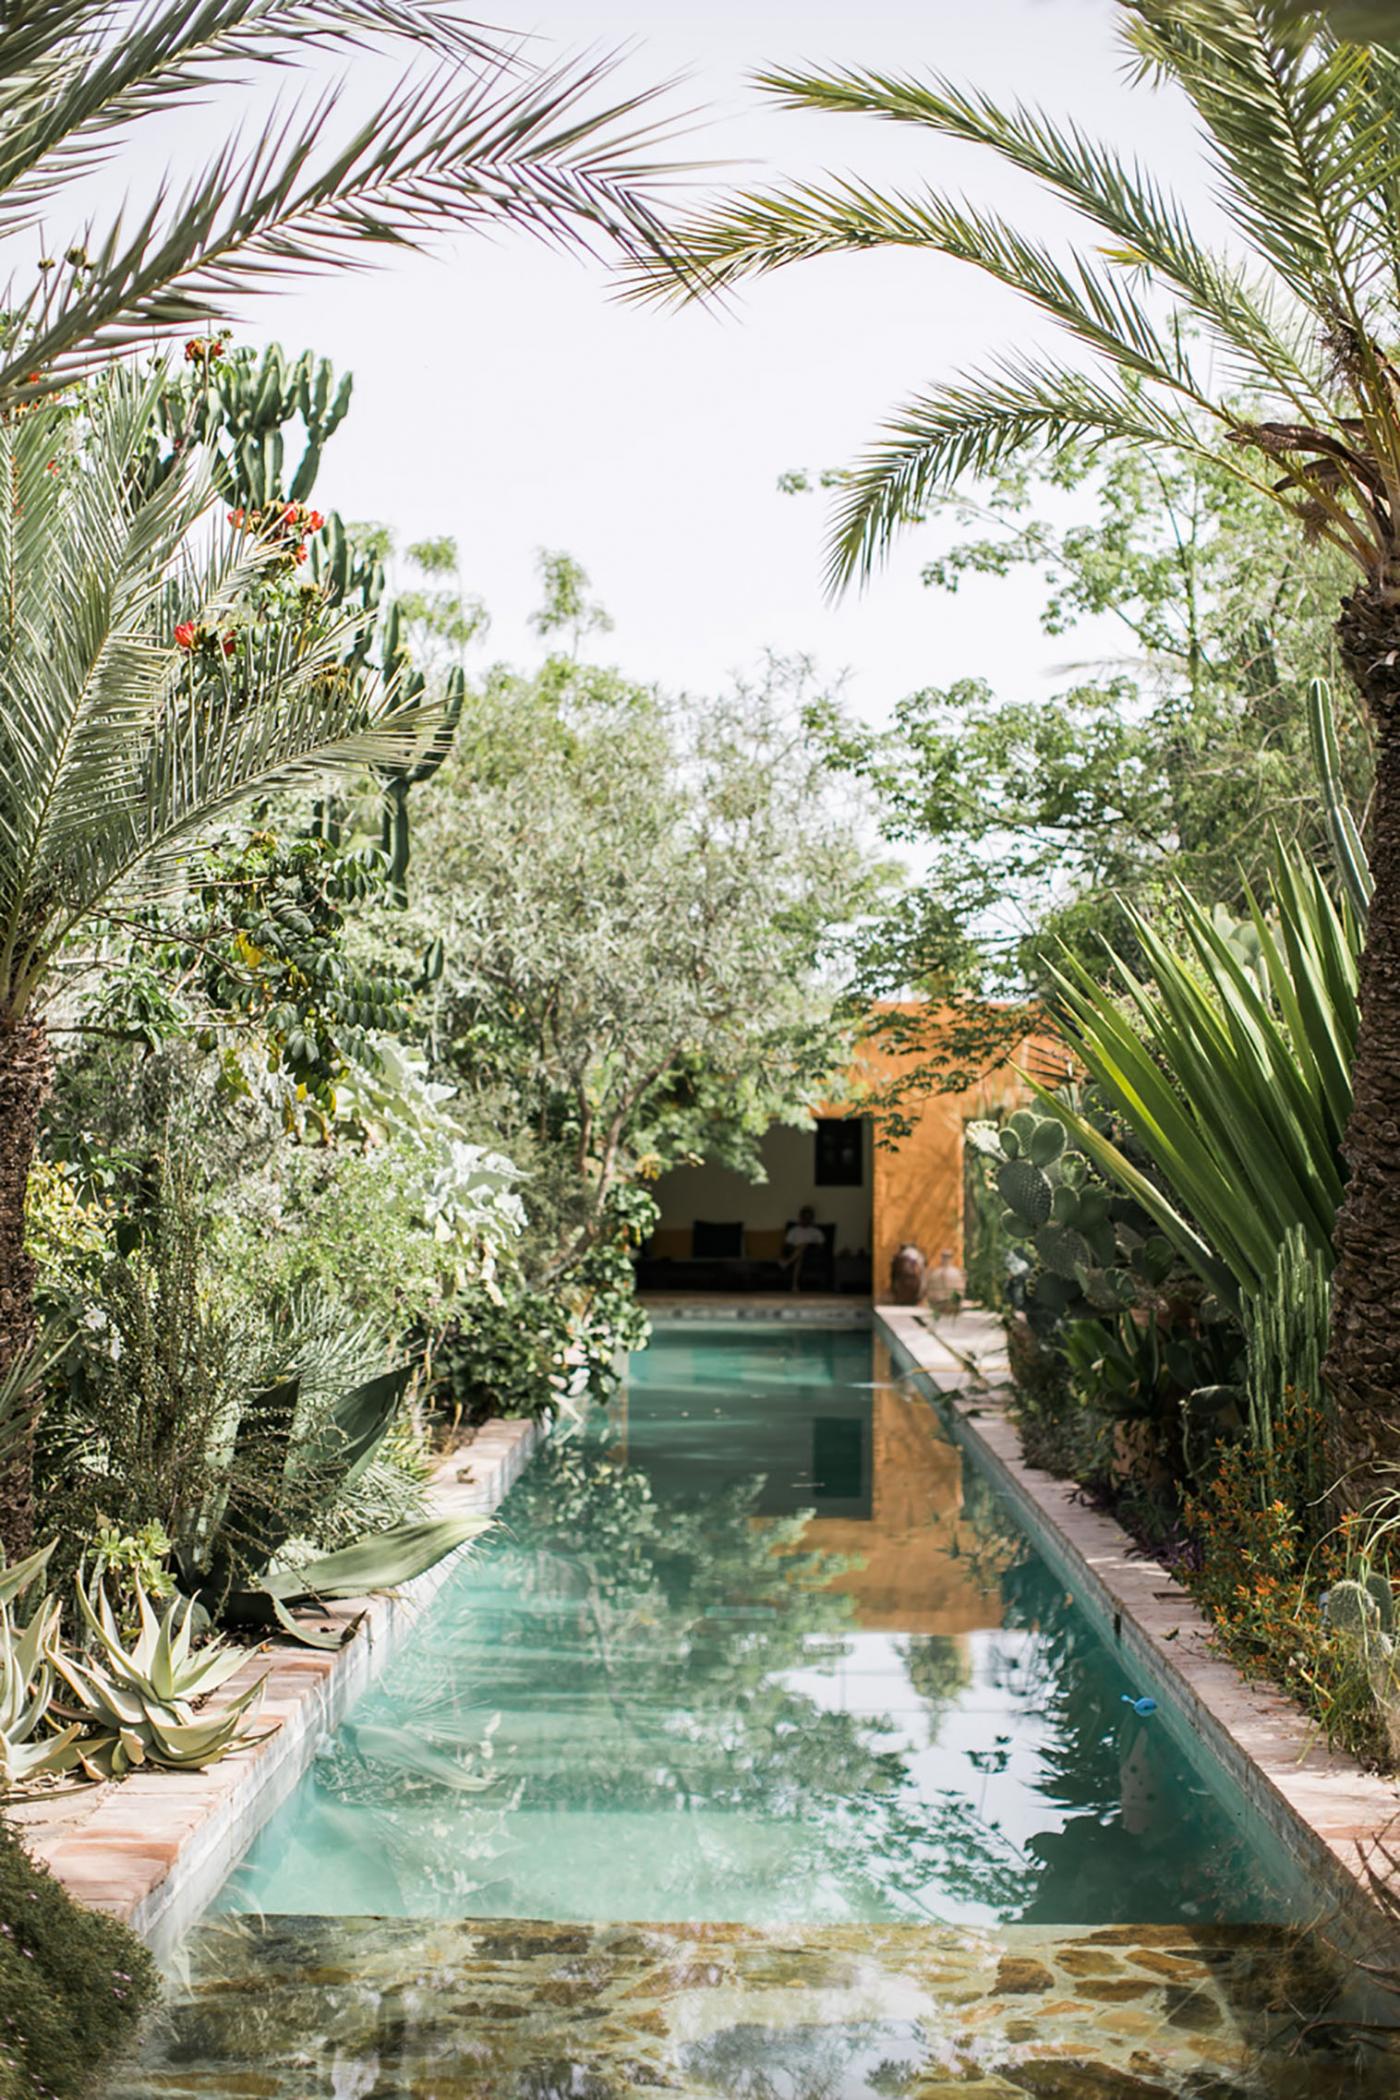 This Destination Jungle Wedding To Morrocco Could Not Have Been Any More Beautiful. 